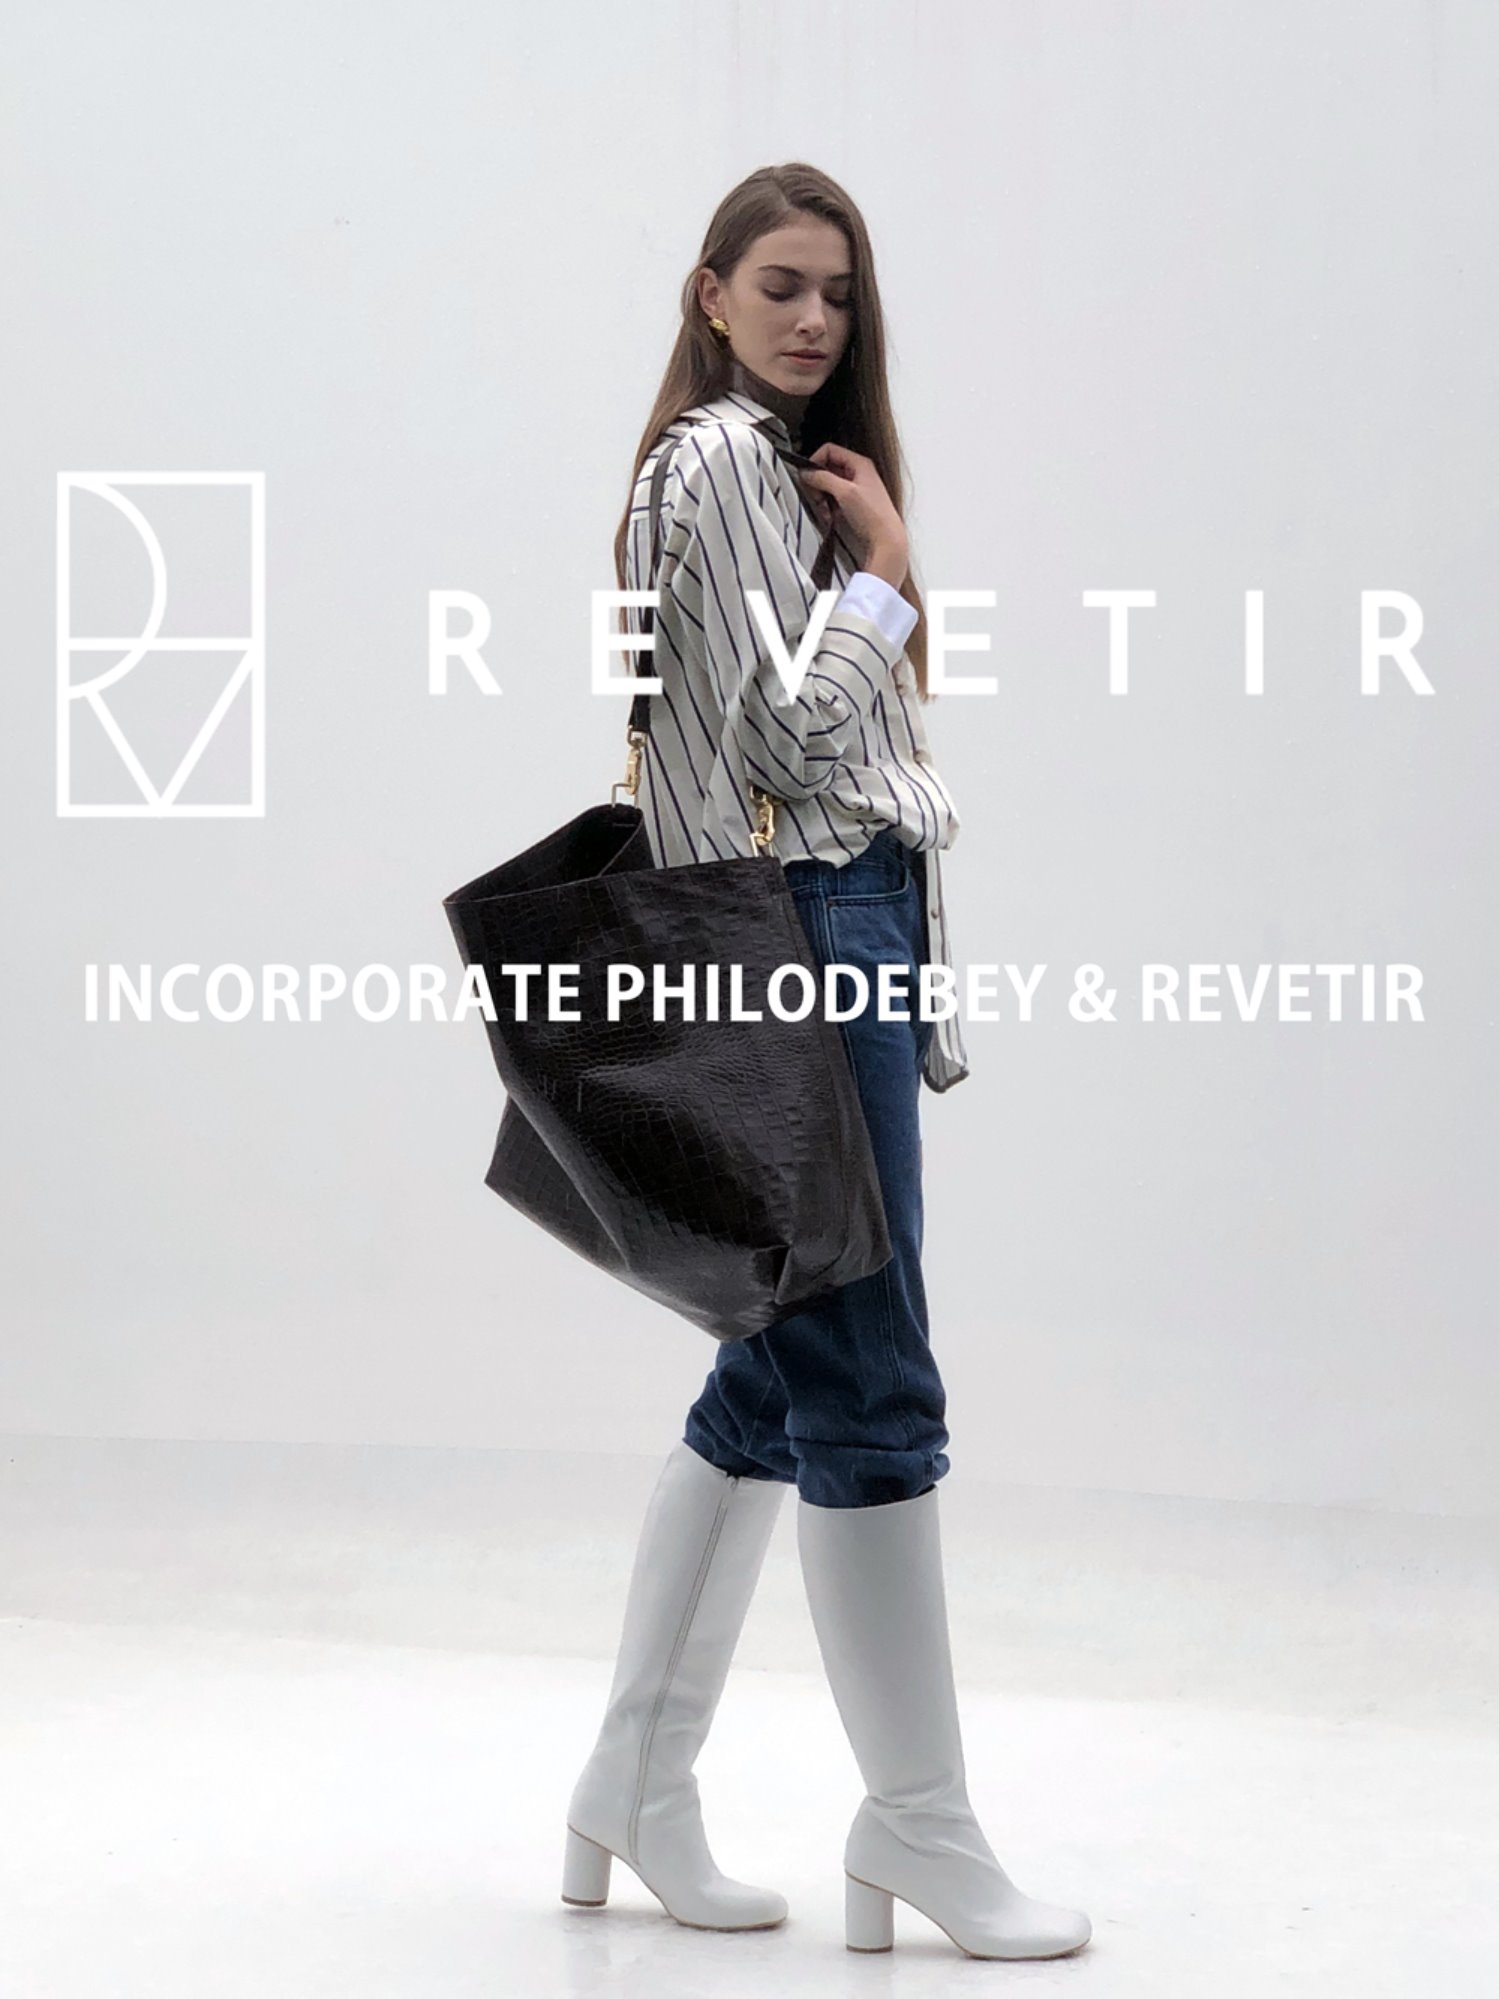 Fashion Brand RevetirPhilodebey